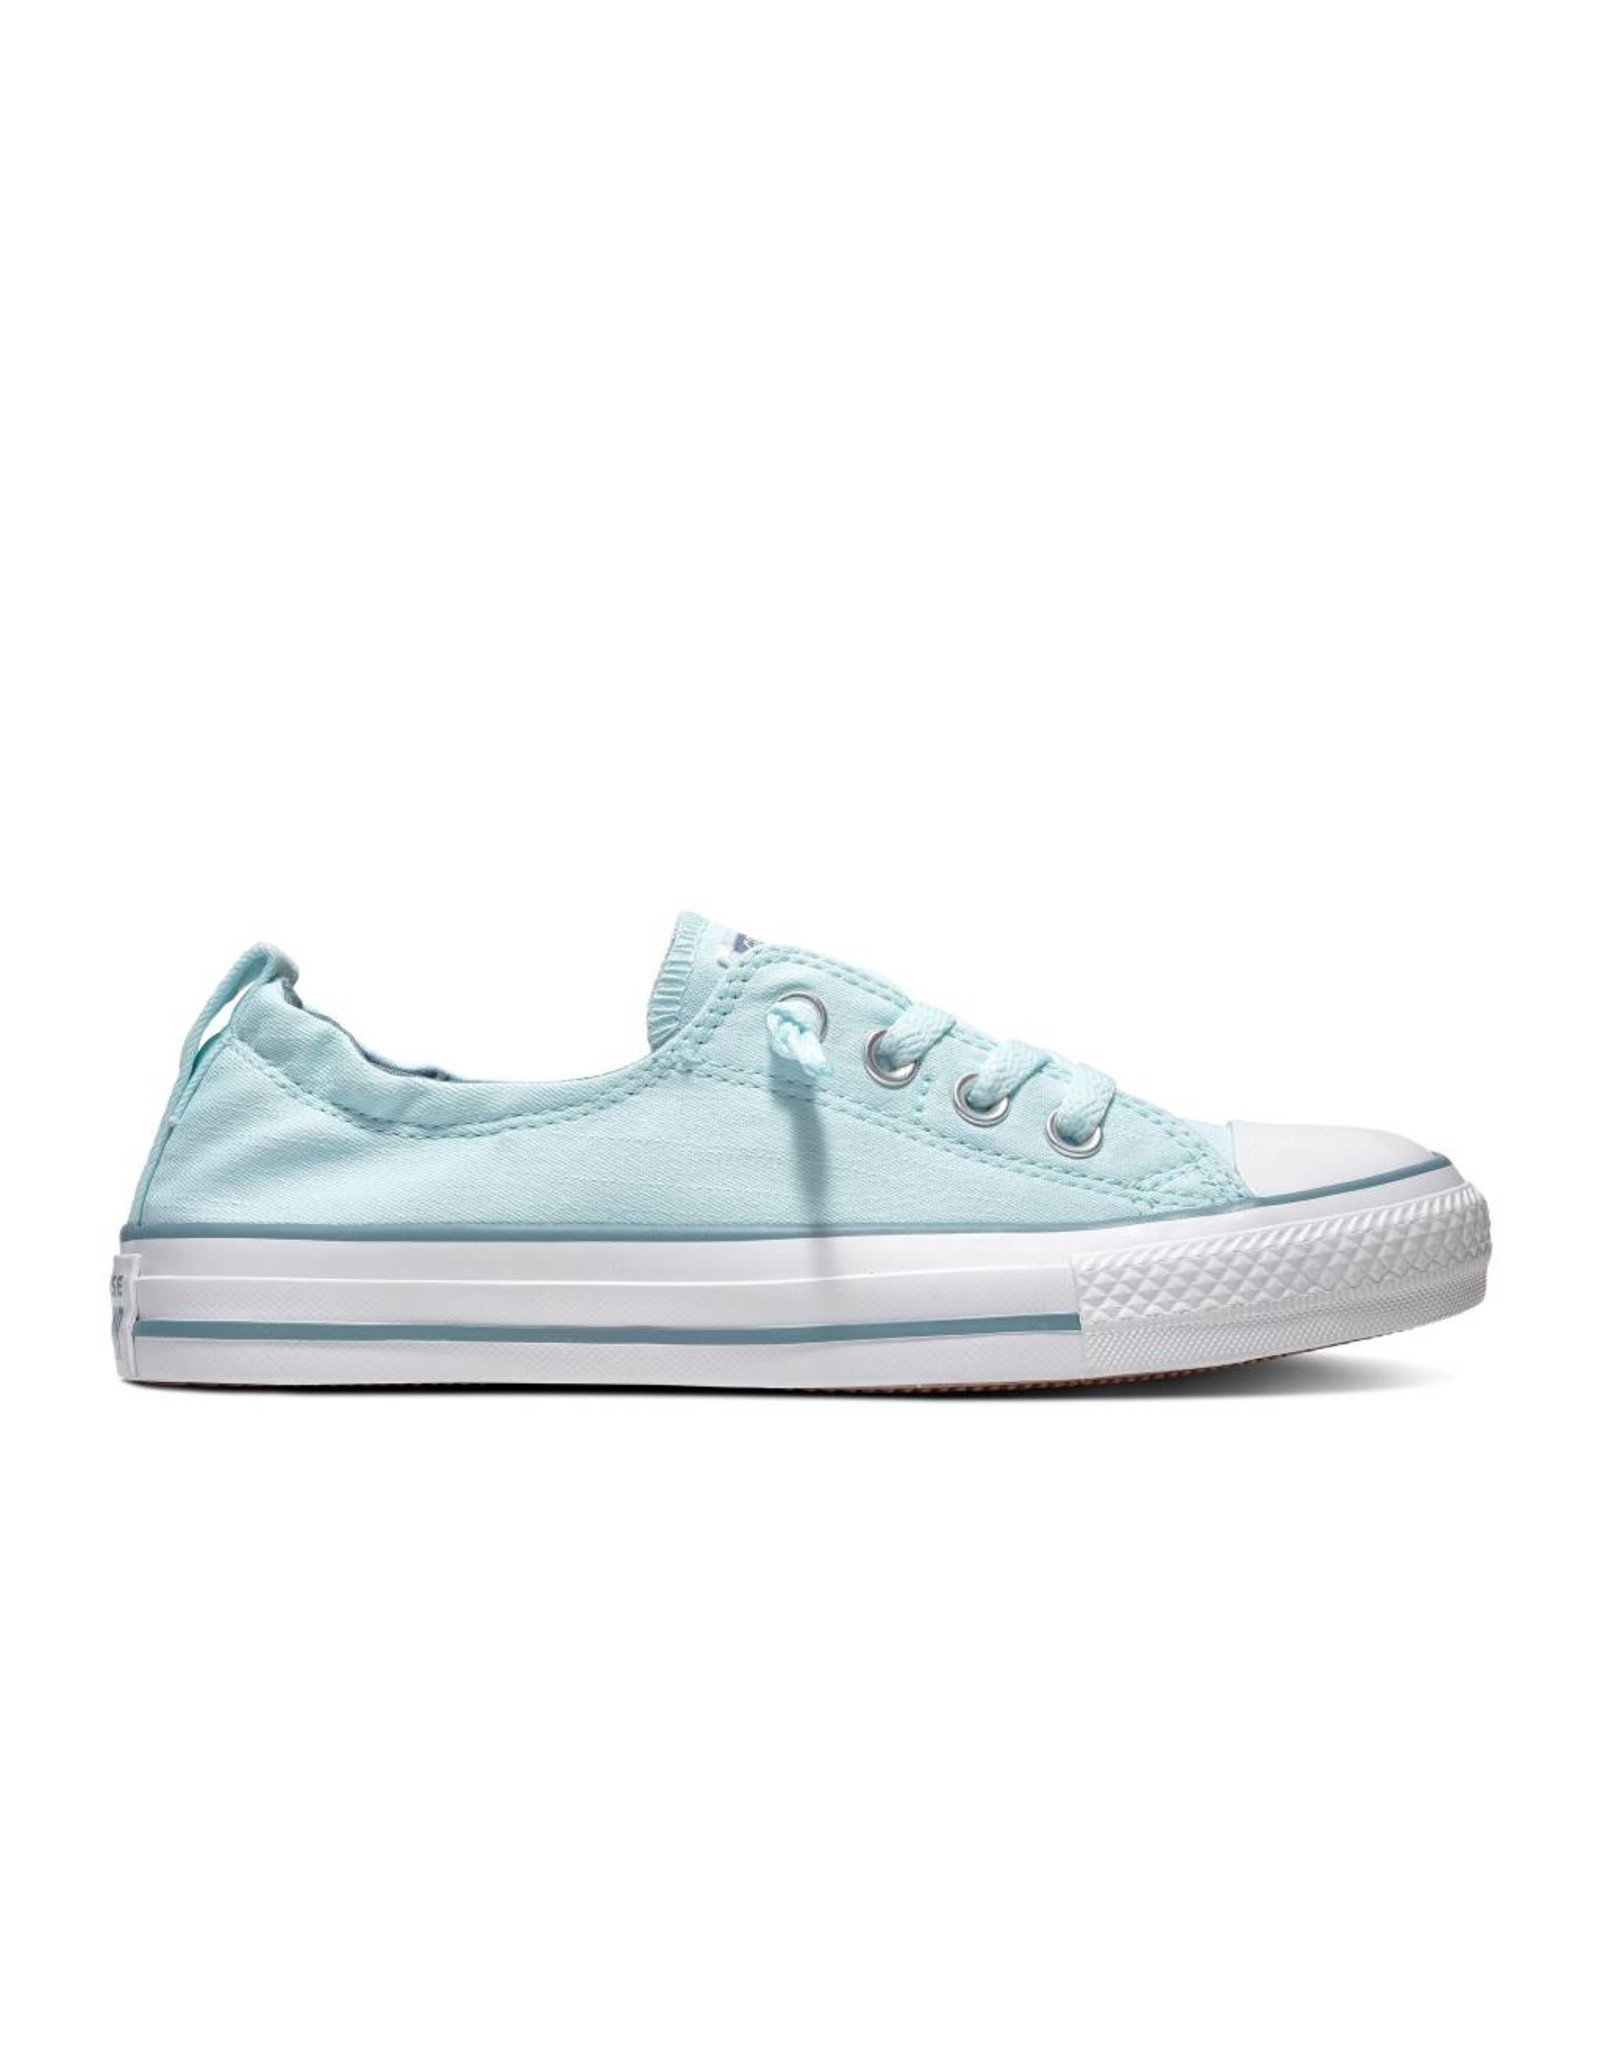 converse shoes teal